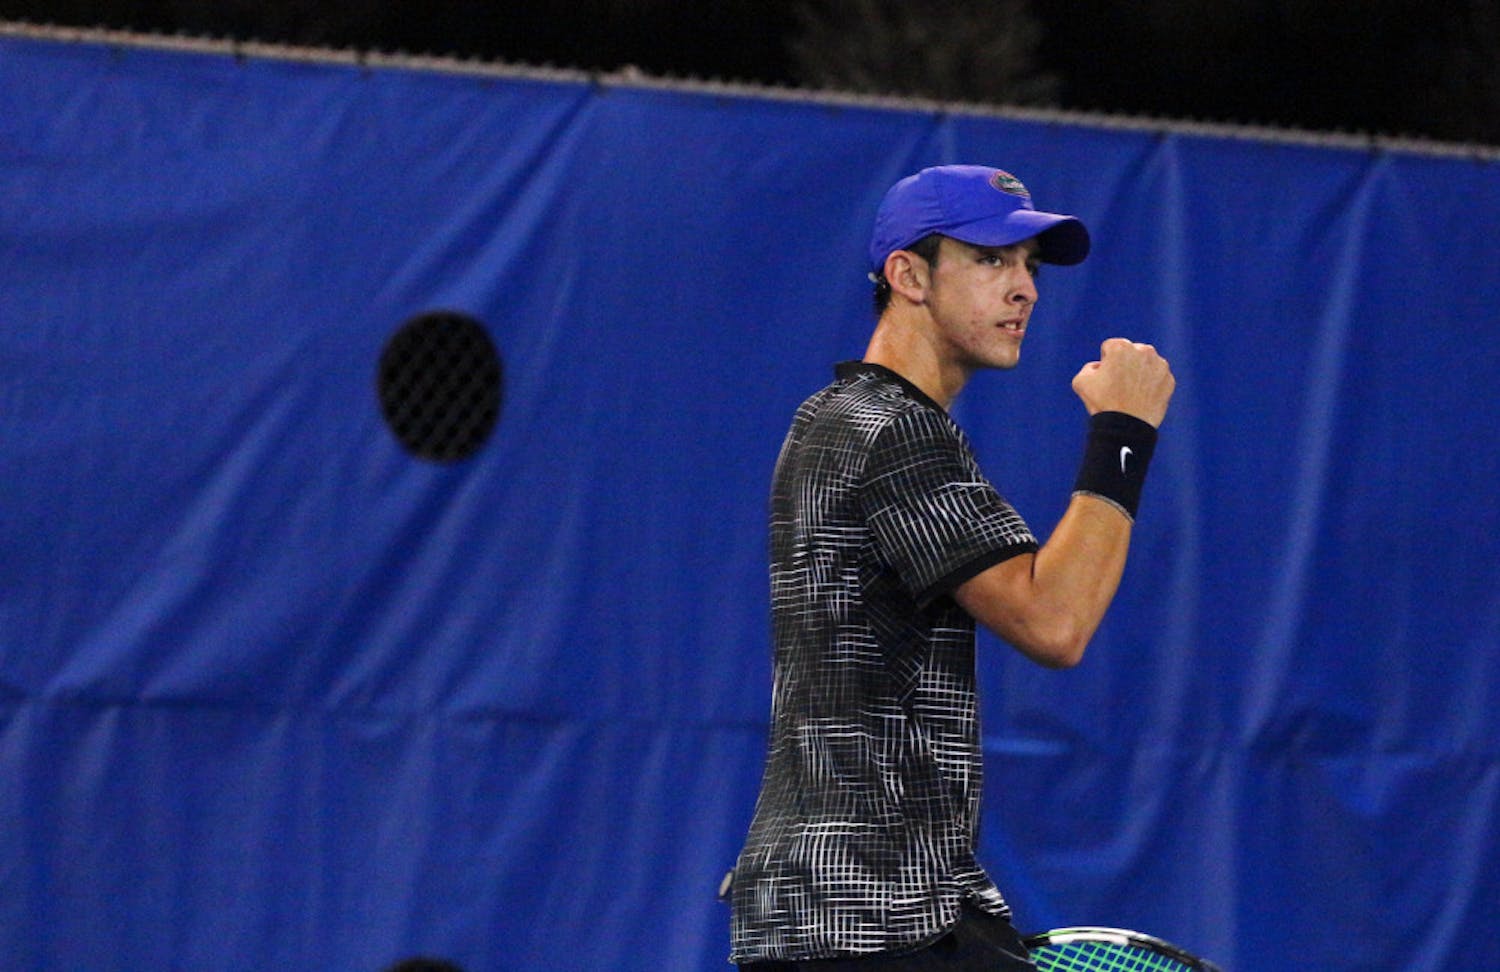 Senior Chase Perez-Blanco helped the Gators win the doubles point and took a singles point as well in a fiery matchup Friday night against Georgia. 